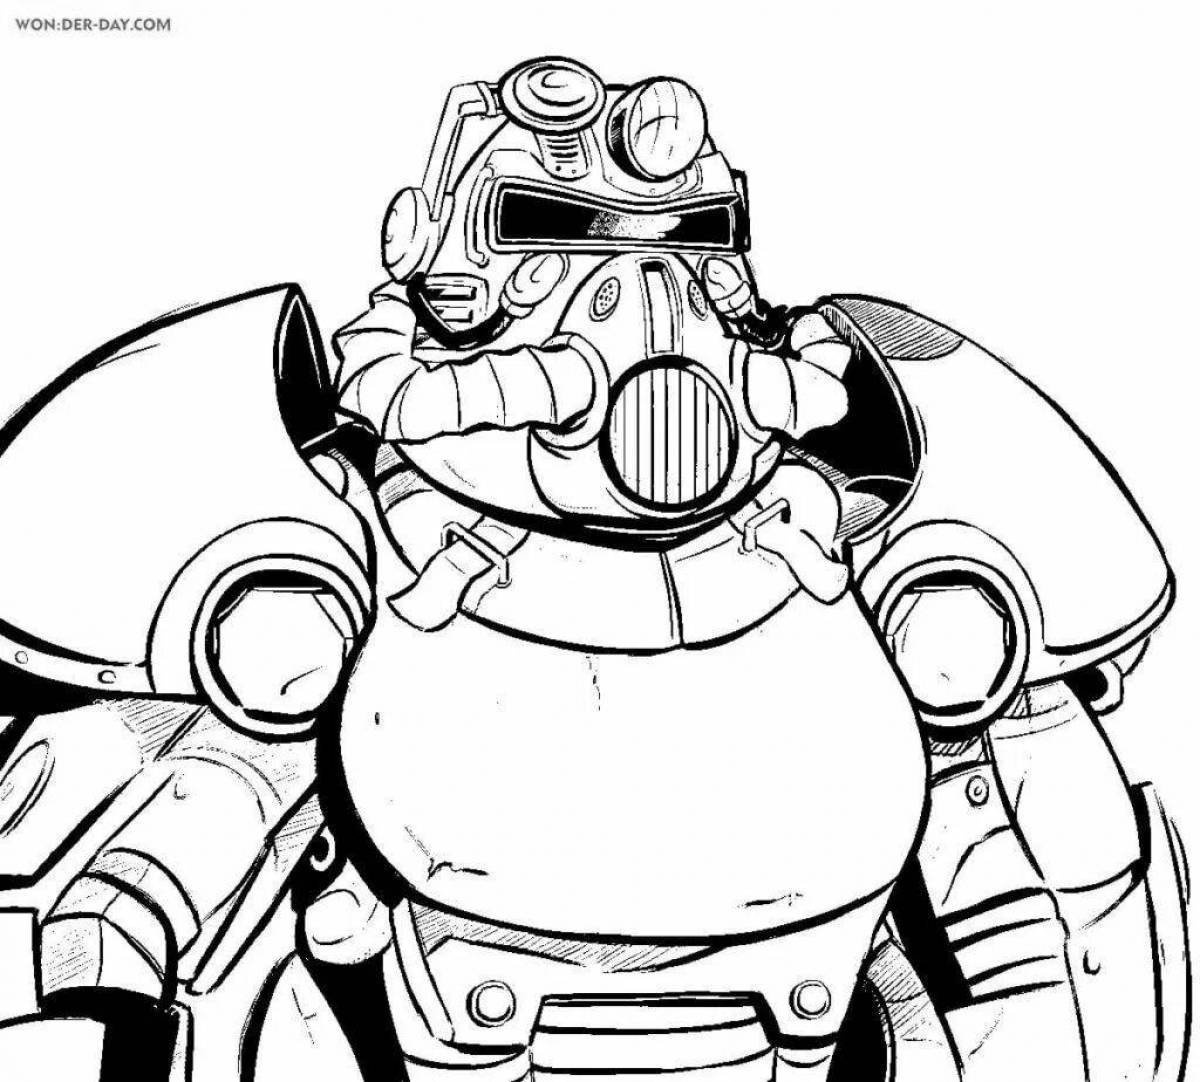 Fallout 4 exquisite power armor skin